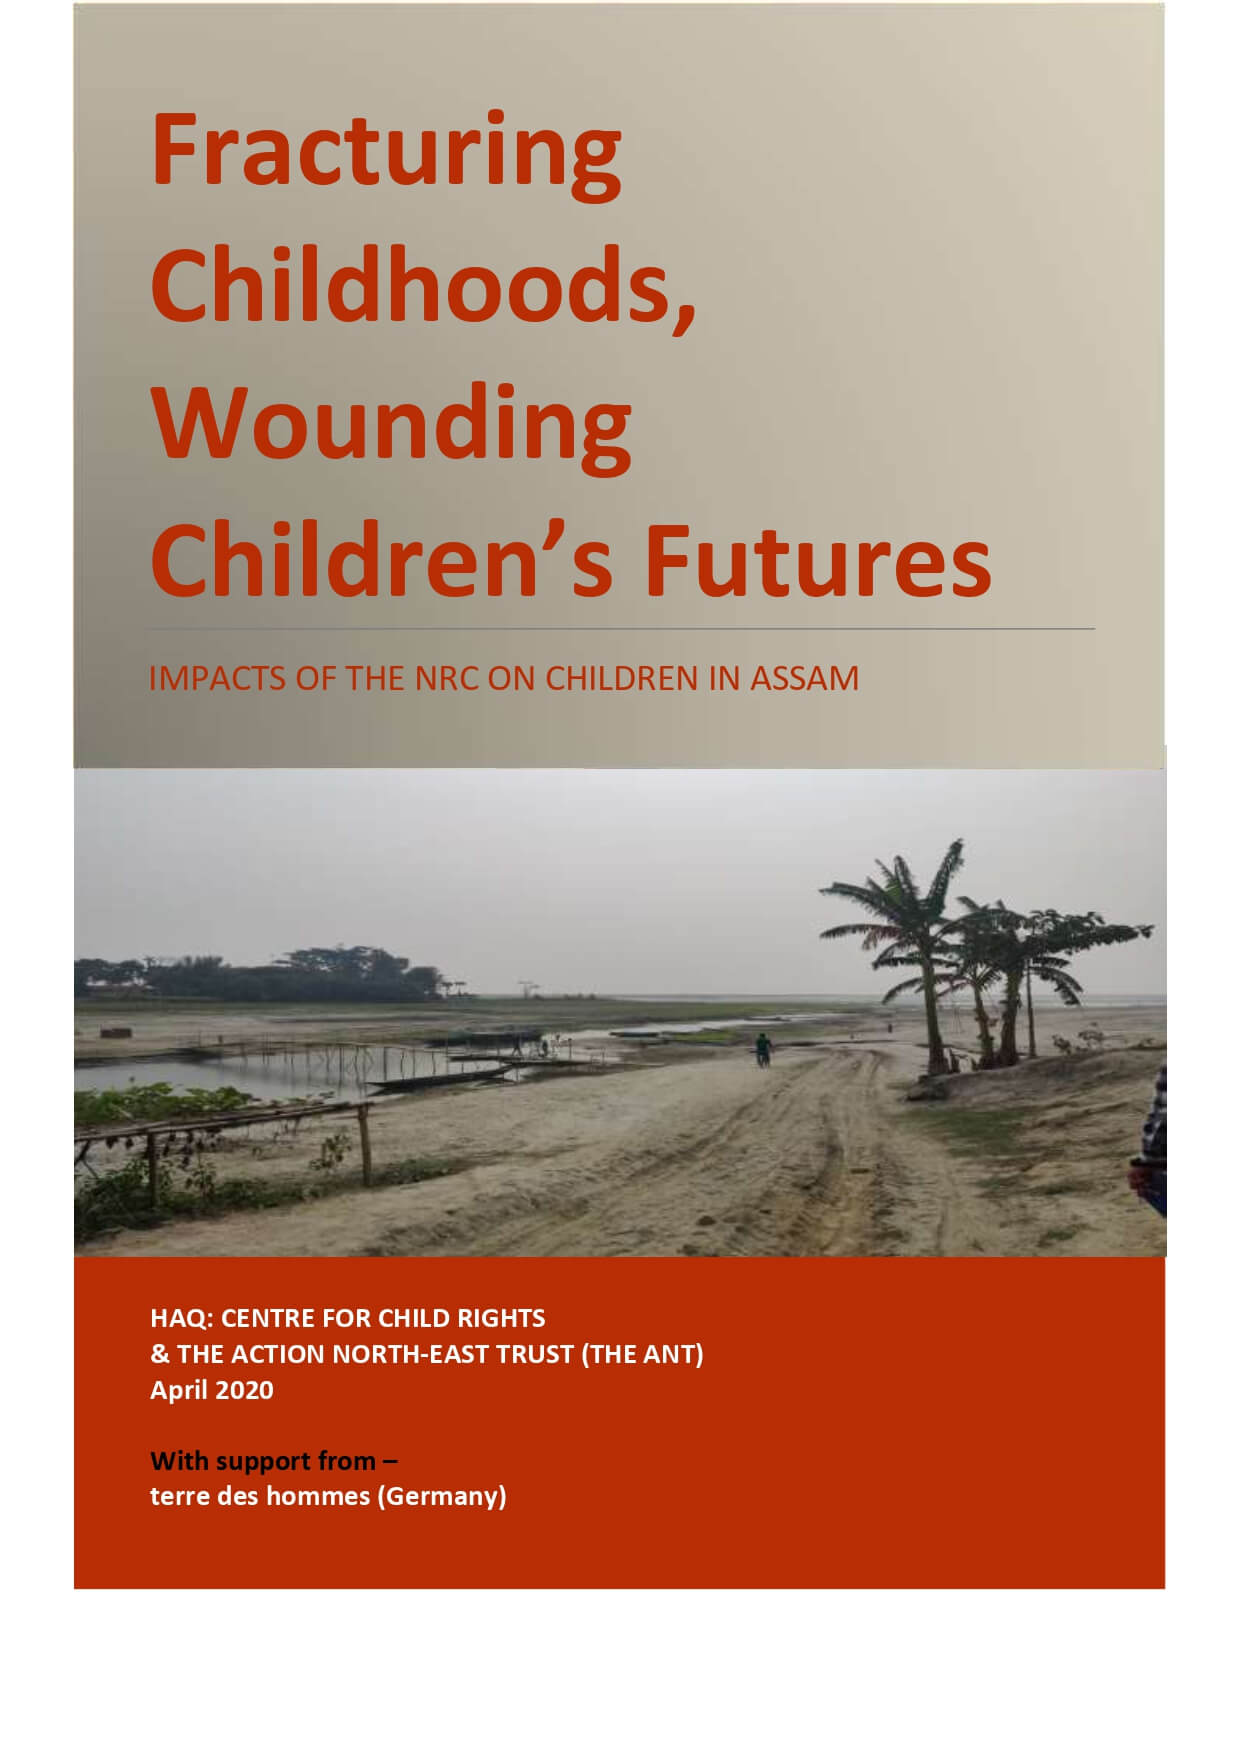 Fracturing Childhoods, Wounding Children’s Futures: Impacts of the NRC on Children in Assam